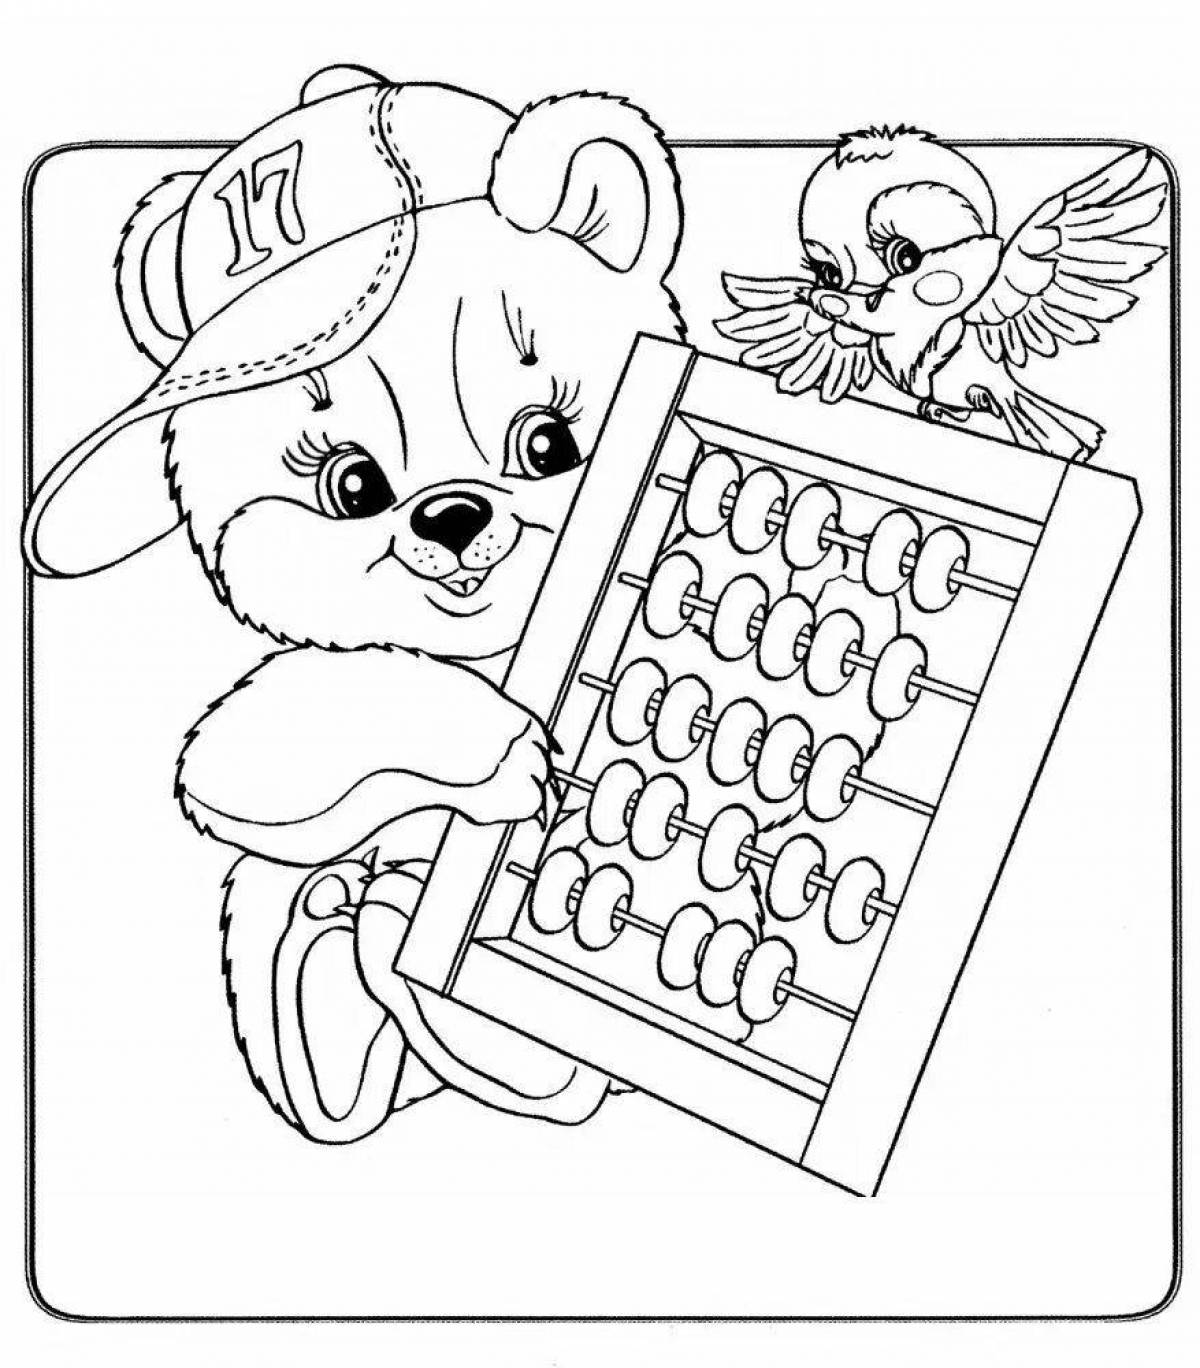 Colorful financial literacy coloring page for preschoolers